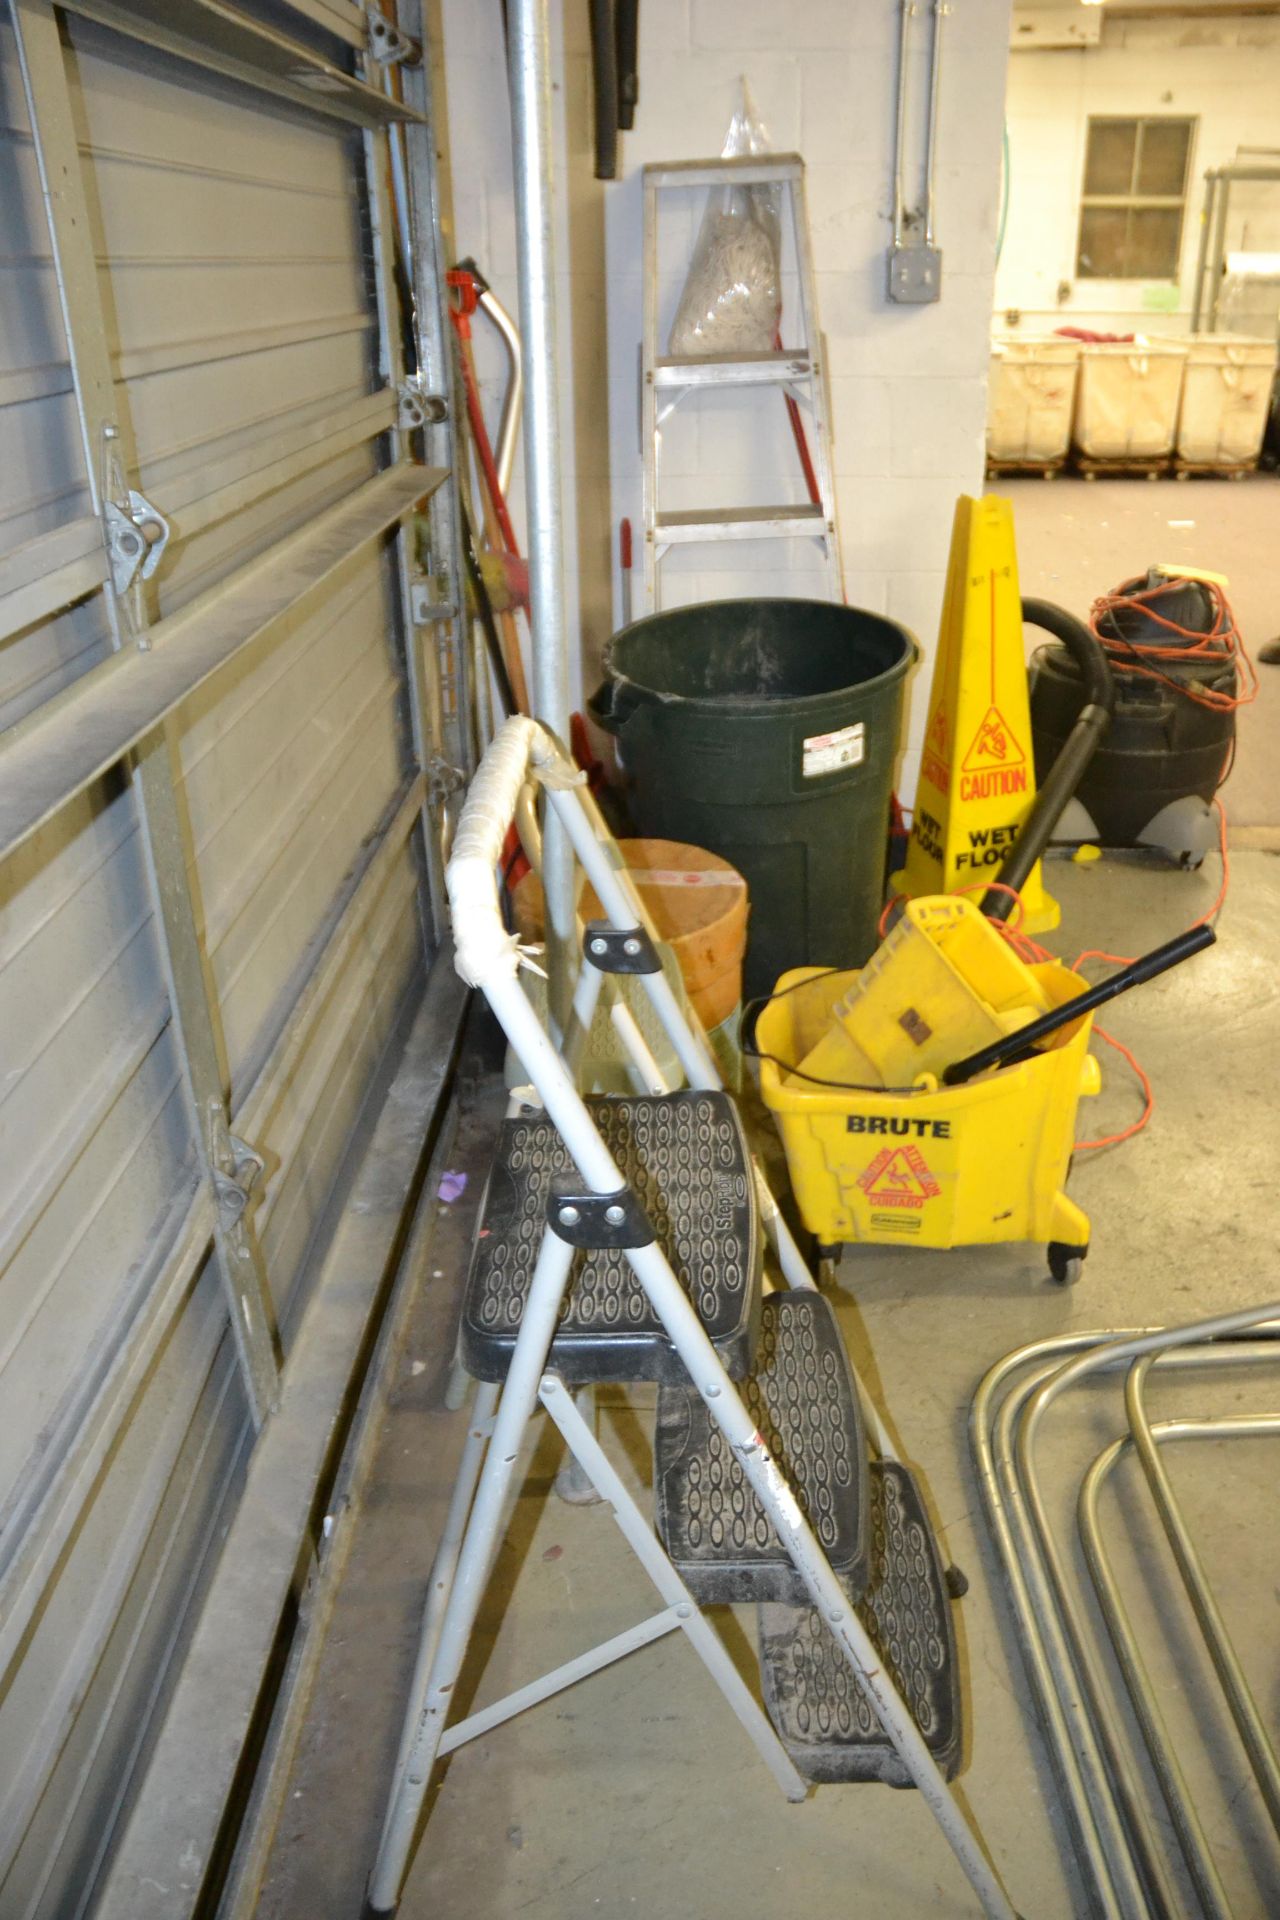 Lot - Wet / Dry Vacuum, 5' Ladder, (2) Stools, Pail & More - Image 2 of 2